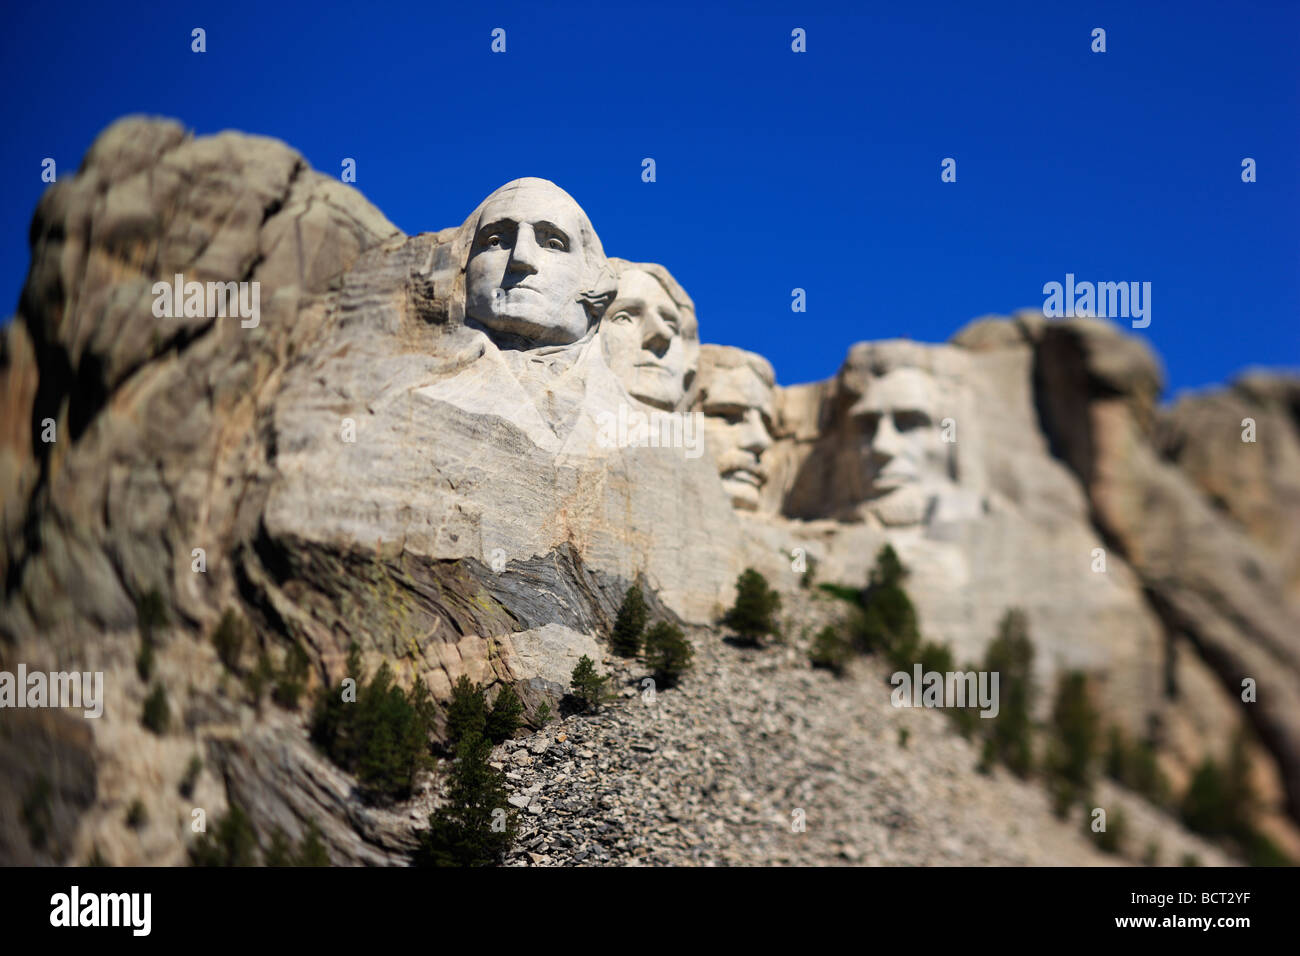 Mount Rushmore National Memorial Banque D'Images